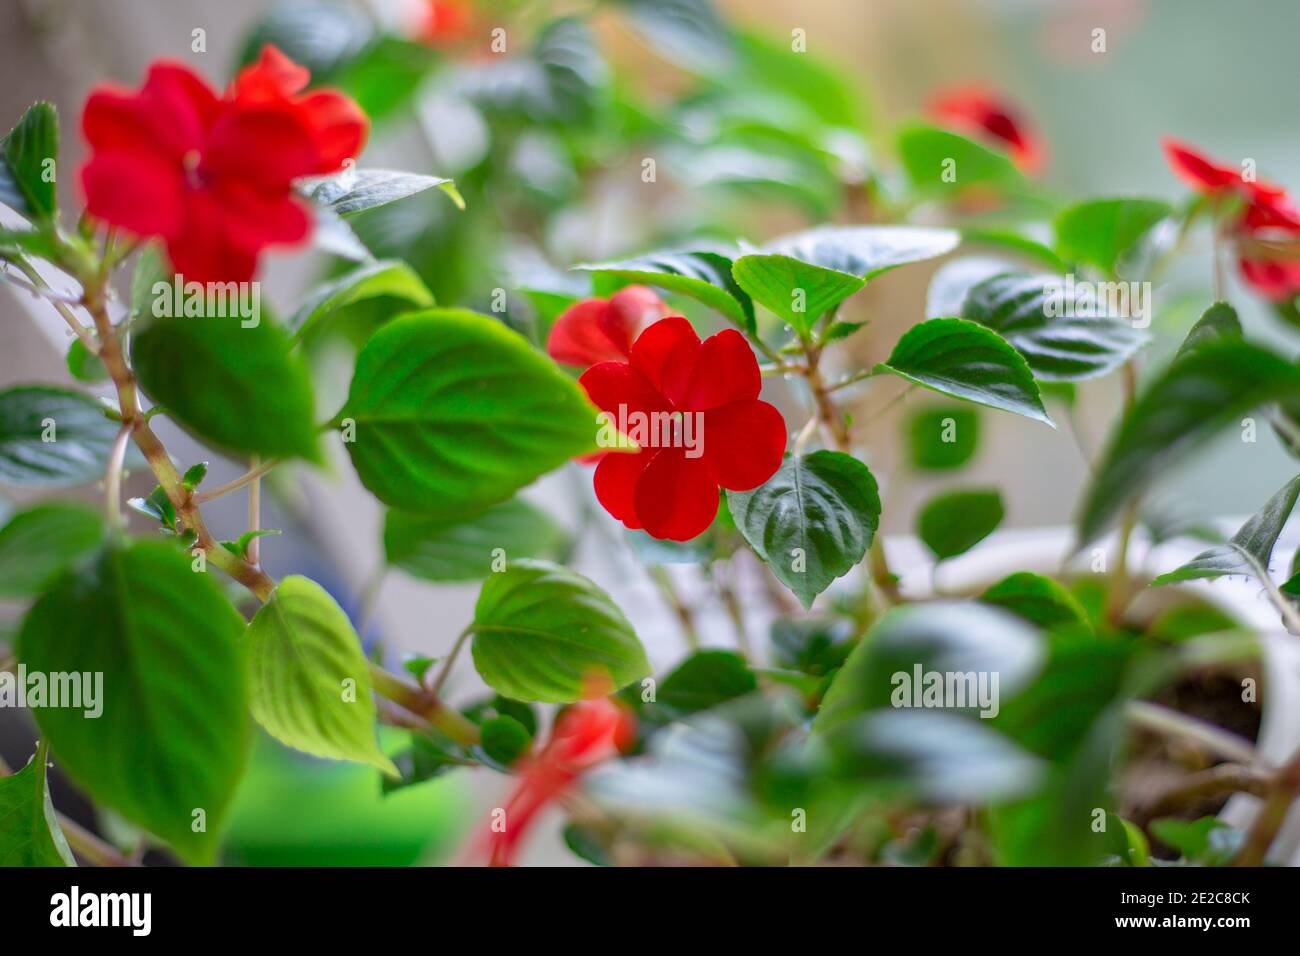 home flower with red bright blossoming flowers, the name of Vanka is wet, Impatiens, unpretentious plants Stock Photo